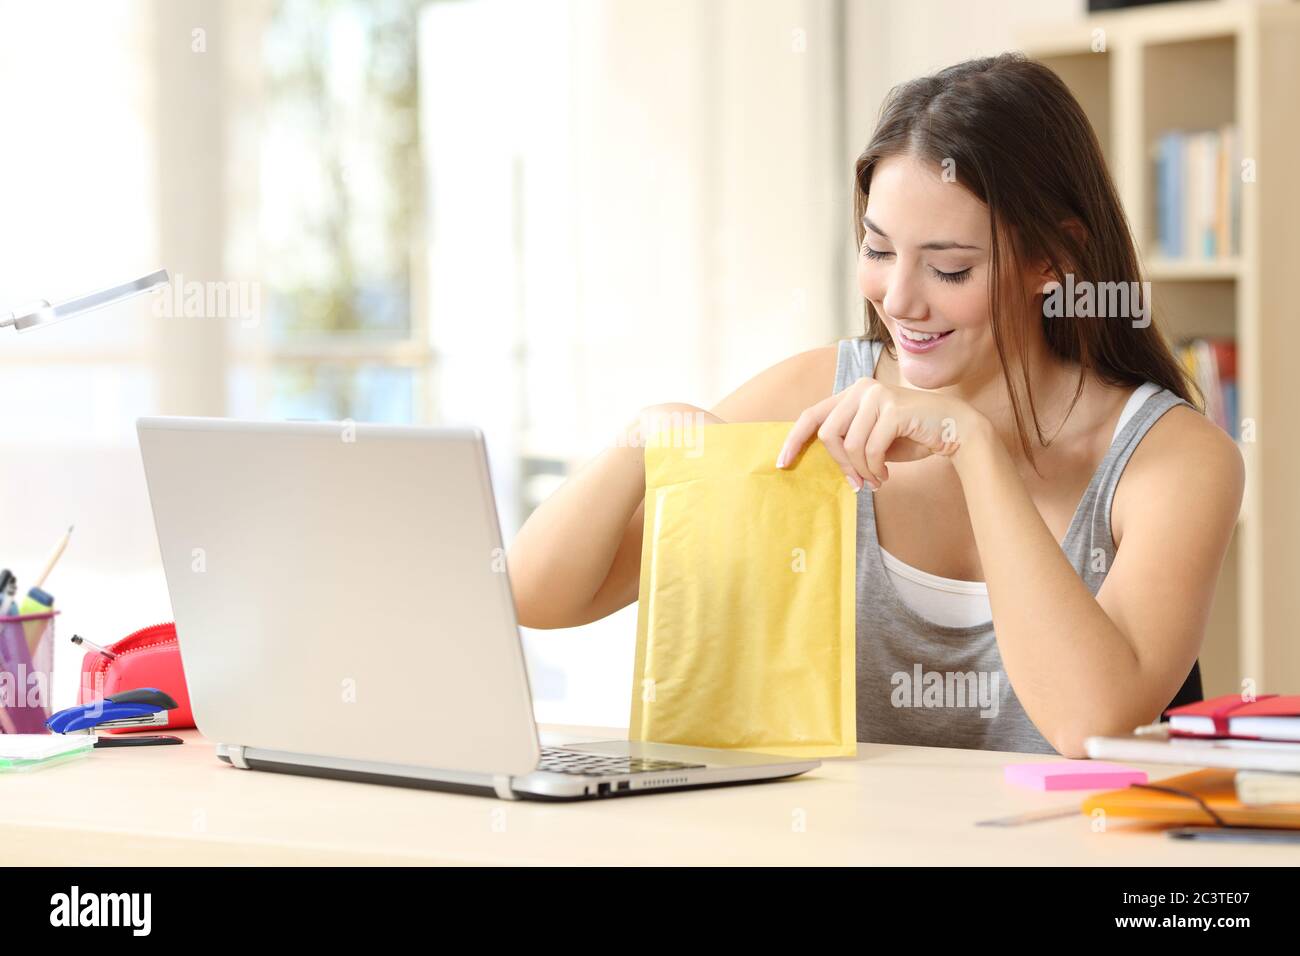 Happy student woman with laptop opening padded envelope sitting on a desk at home Stock Photo